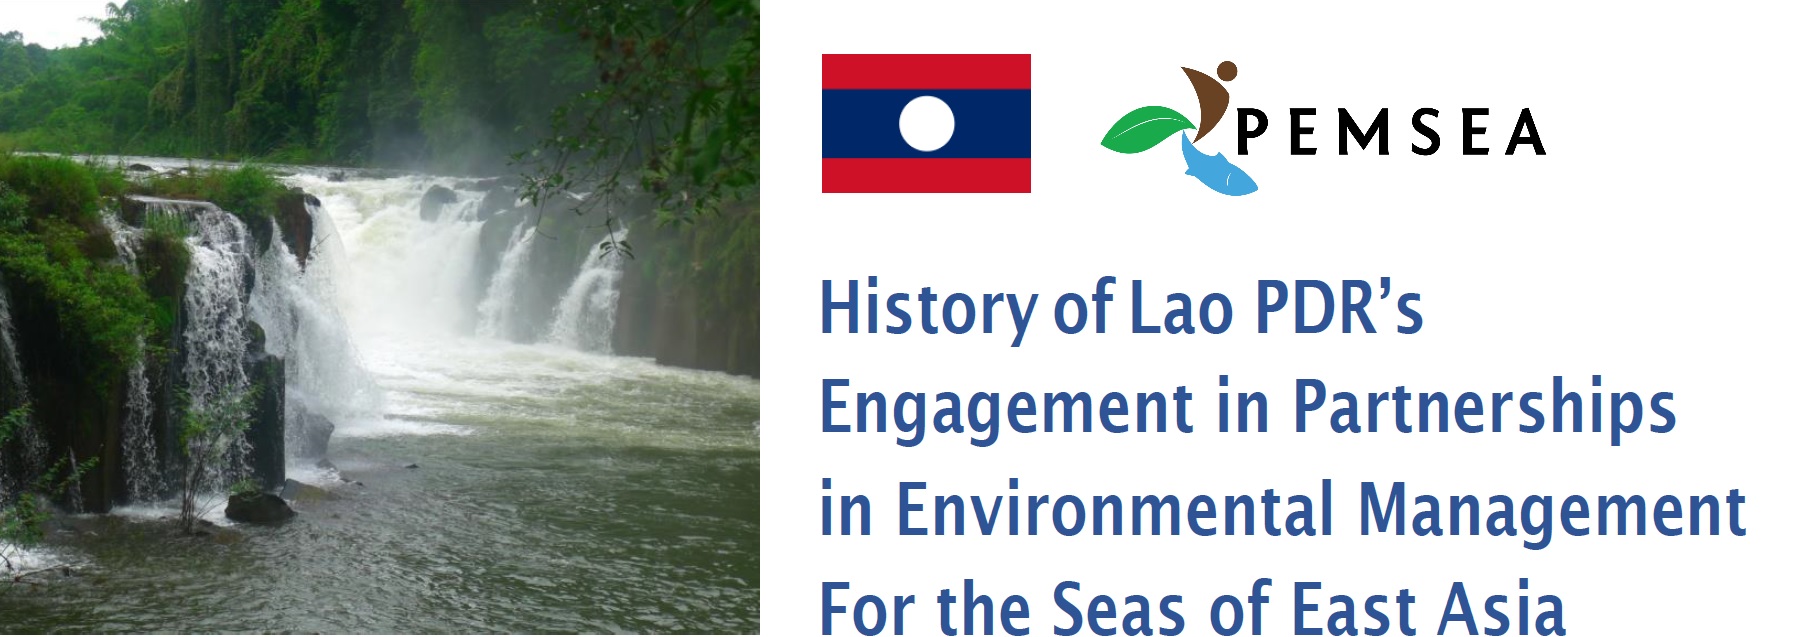 History of Lao PDR’s Engagement in PEMSEA